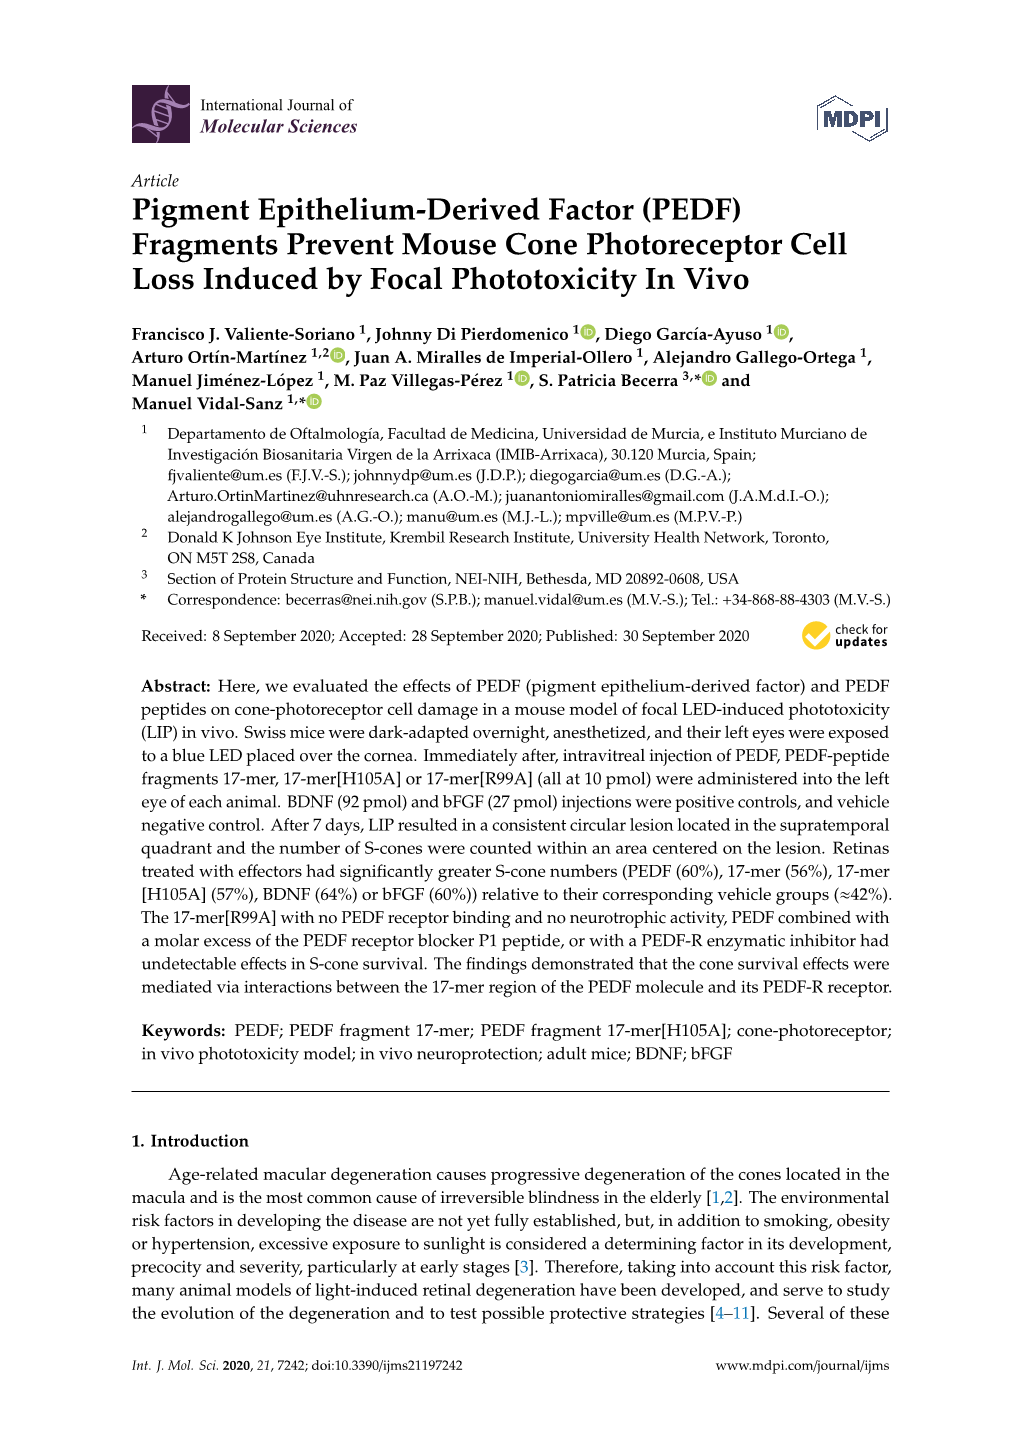 Pigment Epithelium-Derived Factor (PEDF) Fragments Prevent Mouse Cone Photoreceptor Cell Loss Induced by Focal Phototoxicity in Vivo